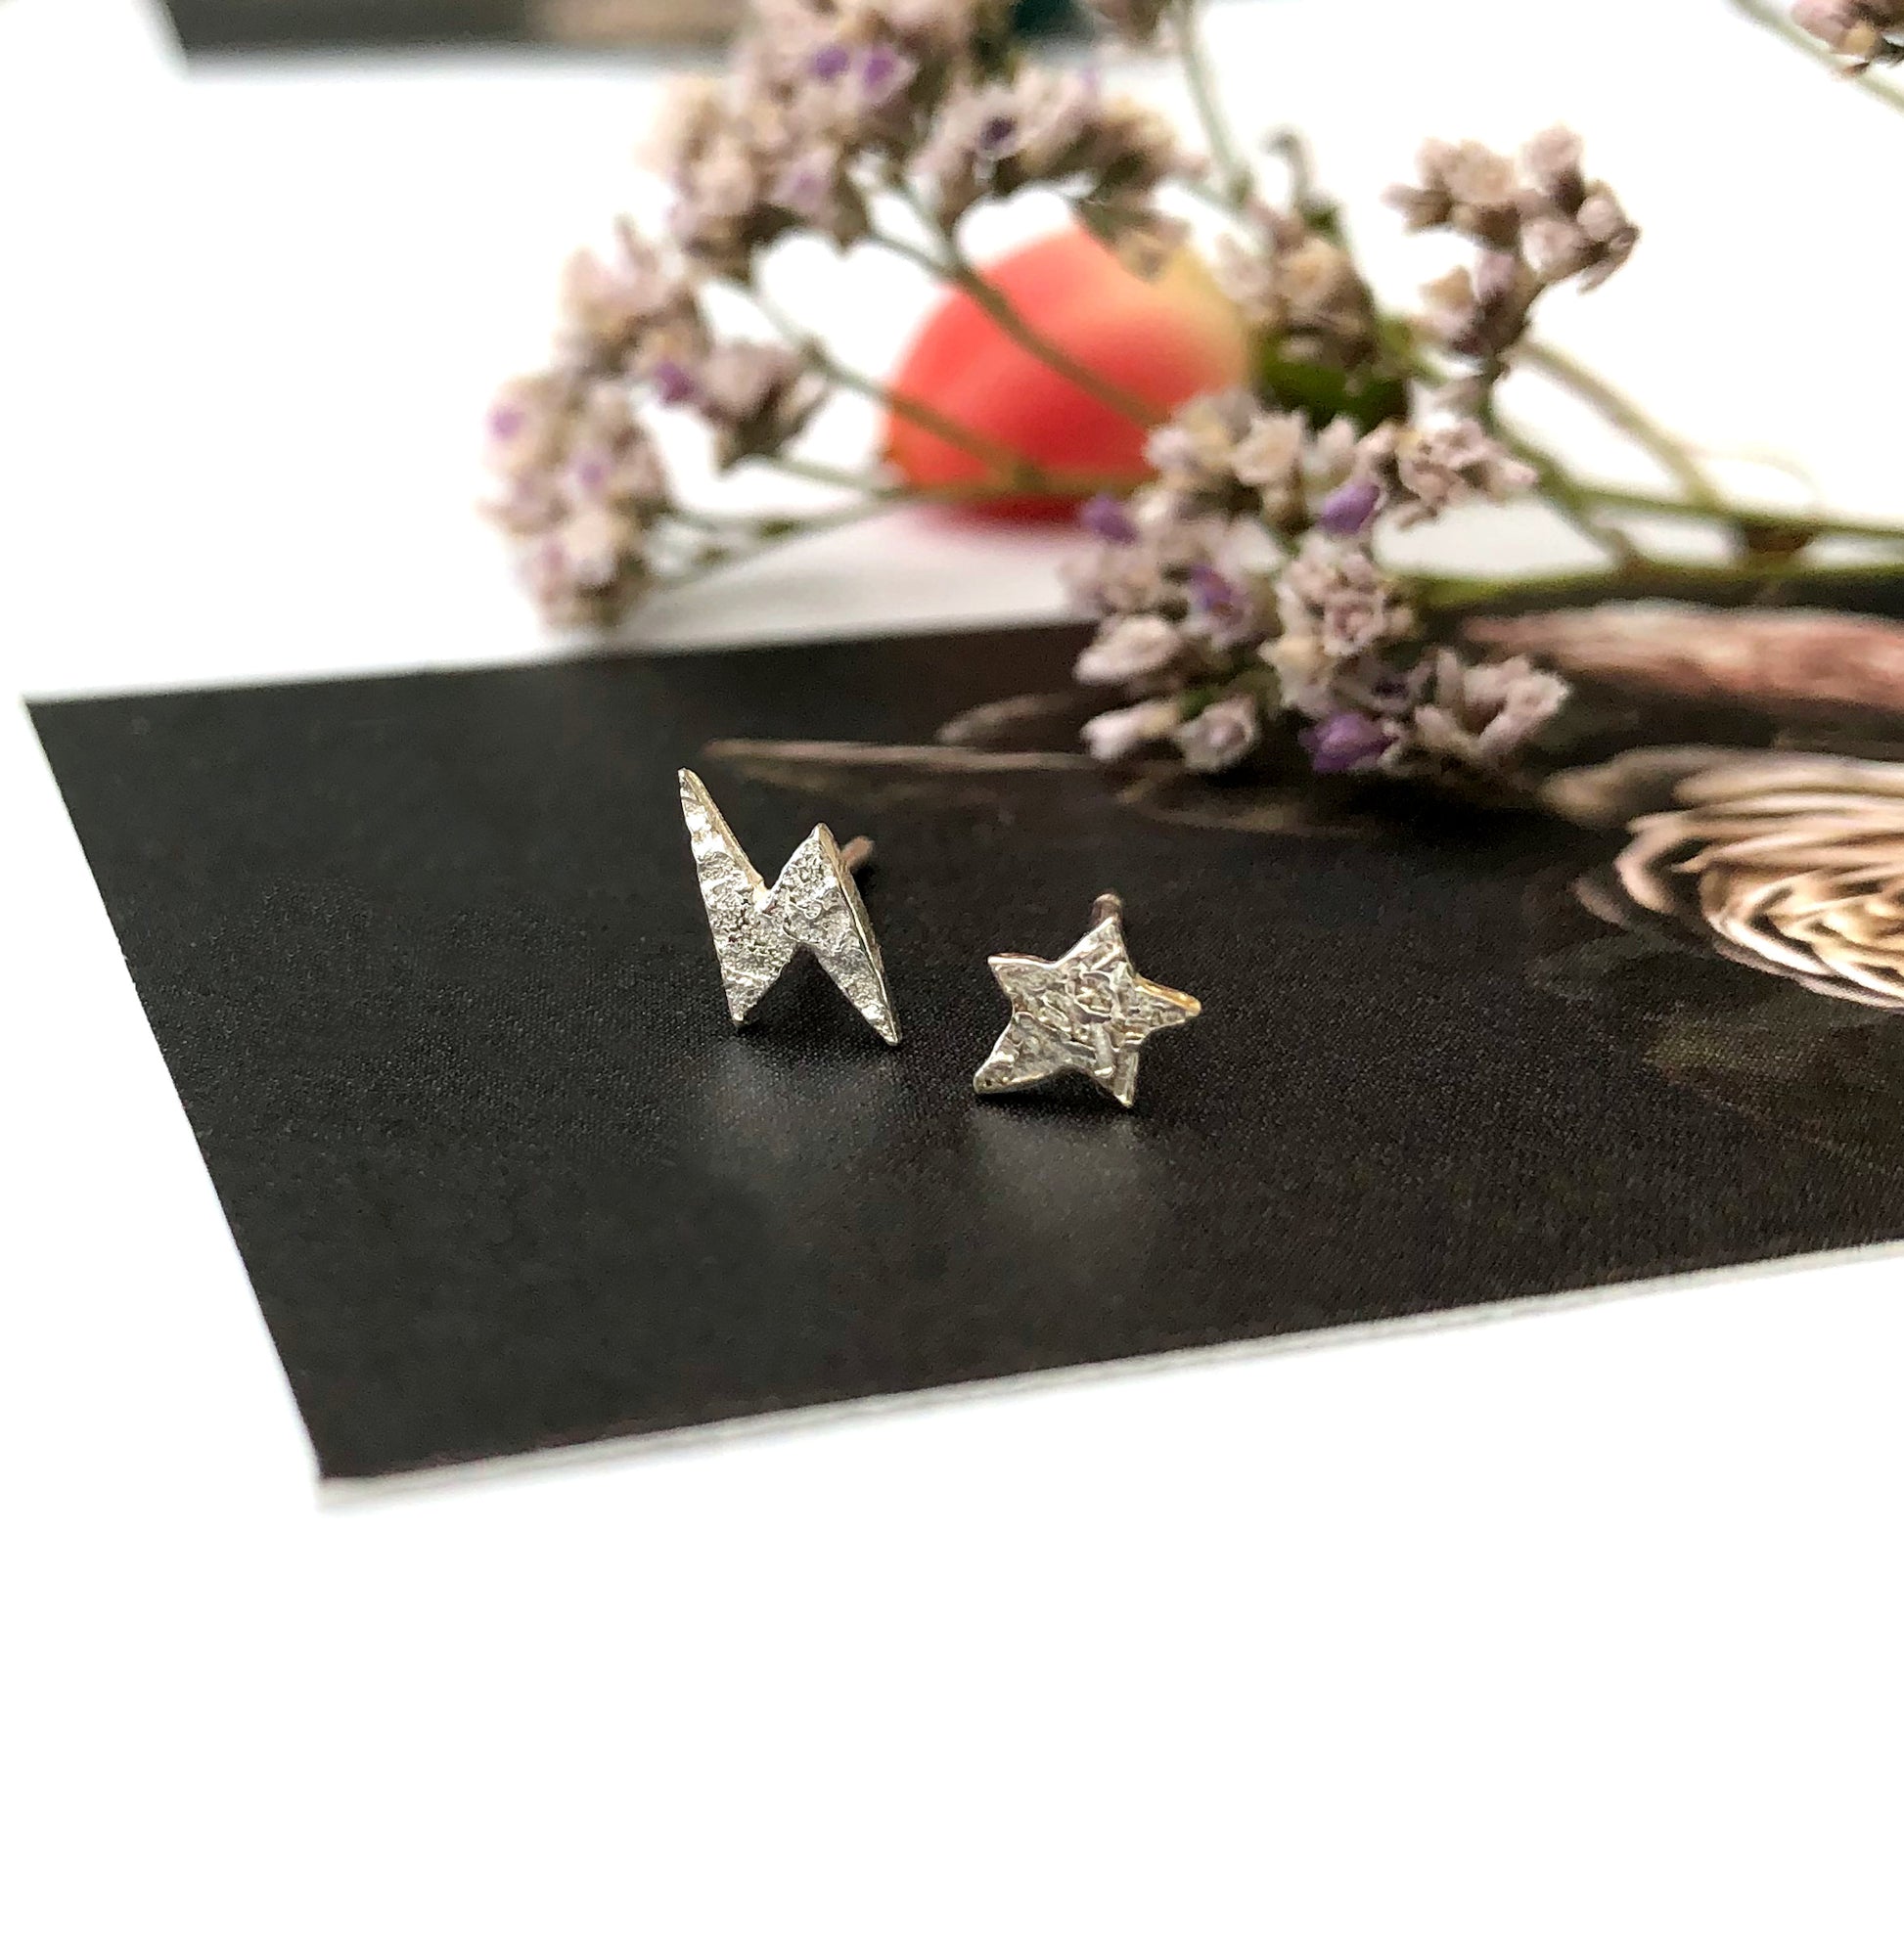 Lightning Bolt And Star Earrings Sterling Silver Mismatched Earrings